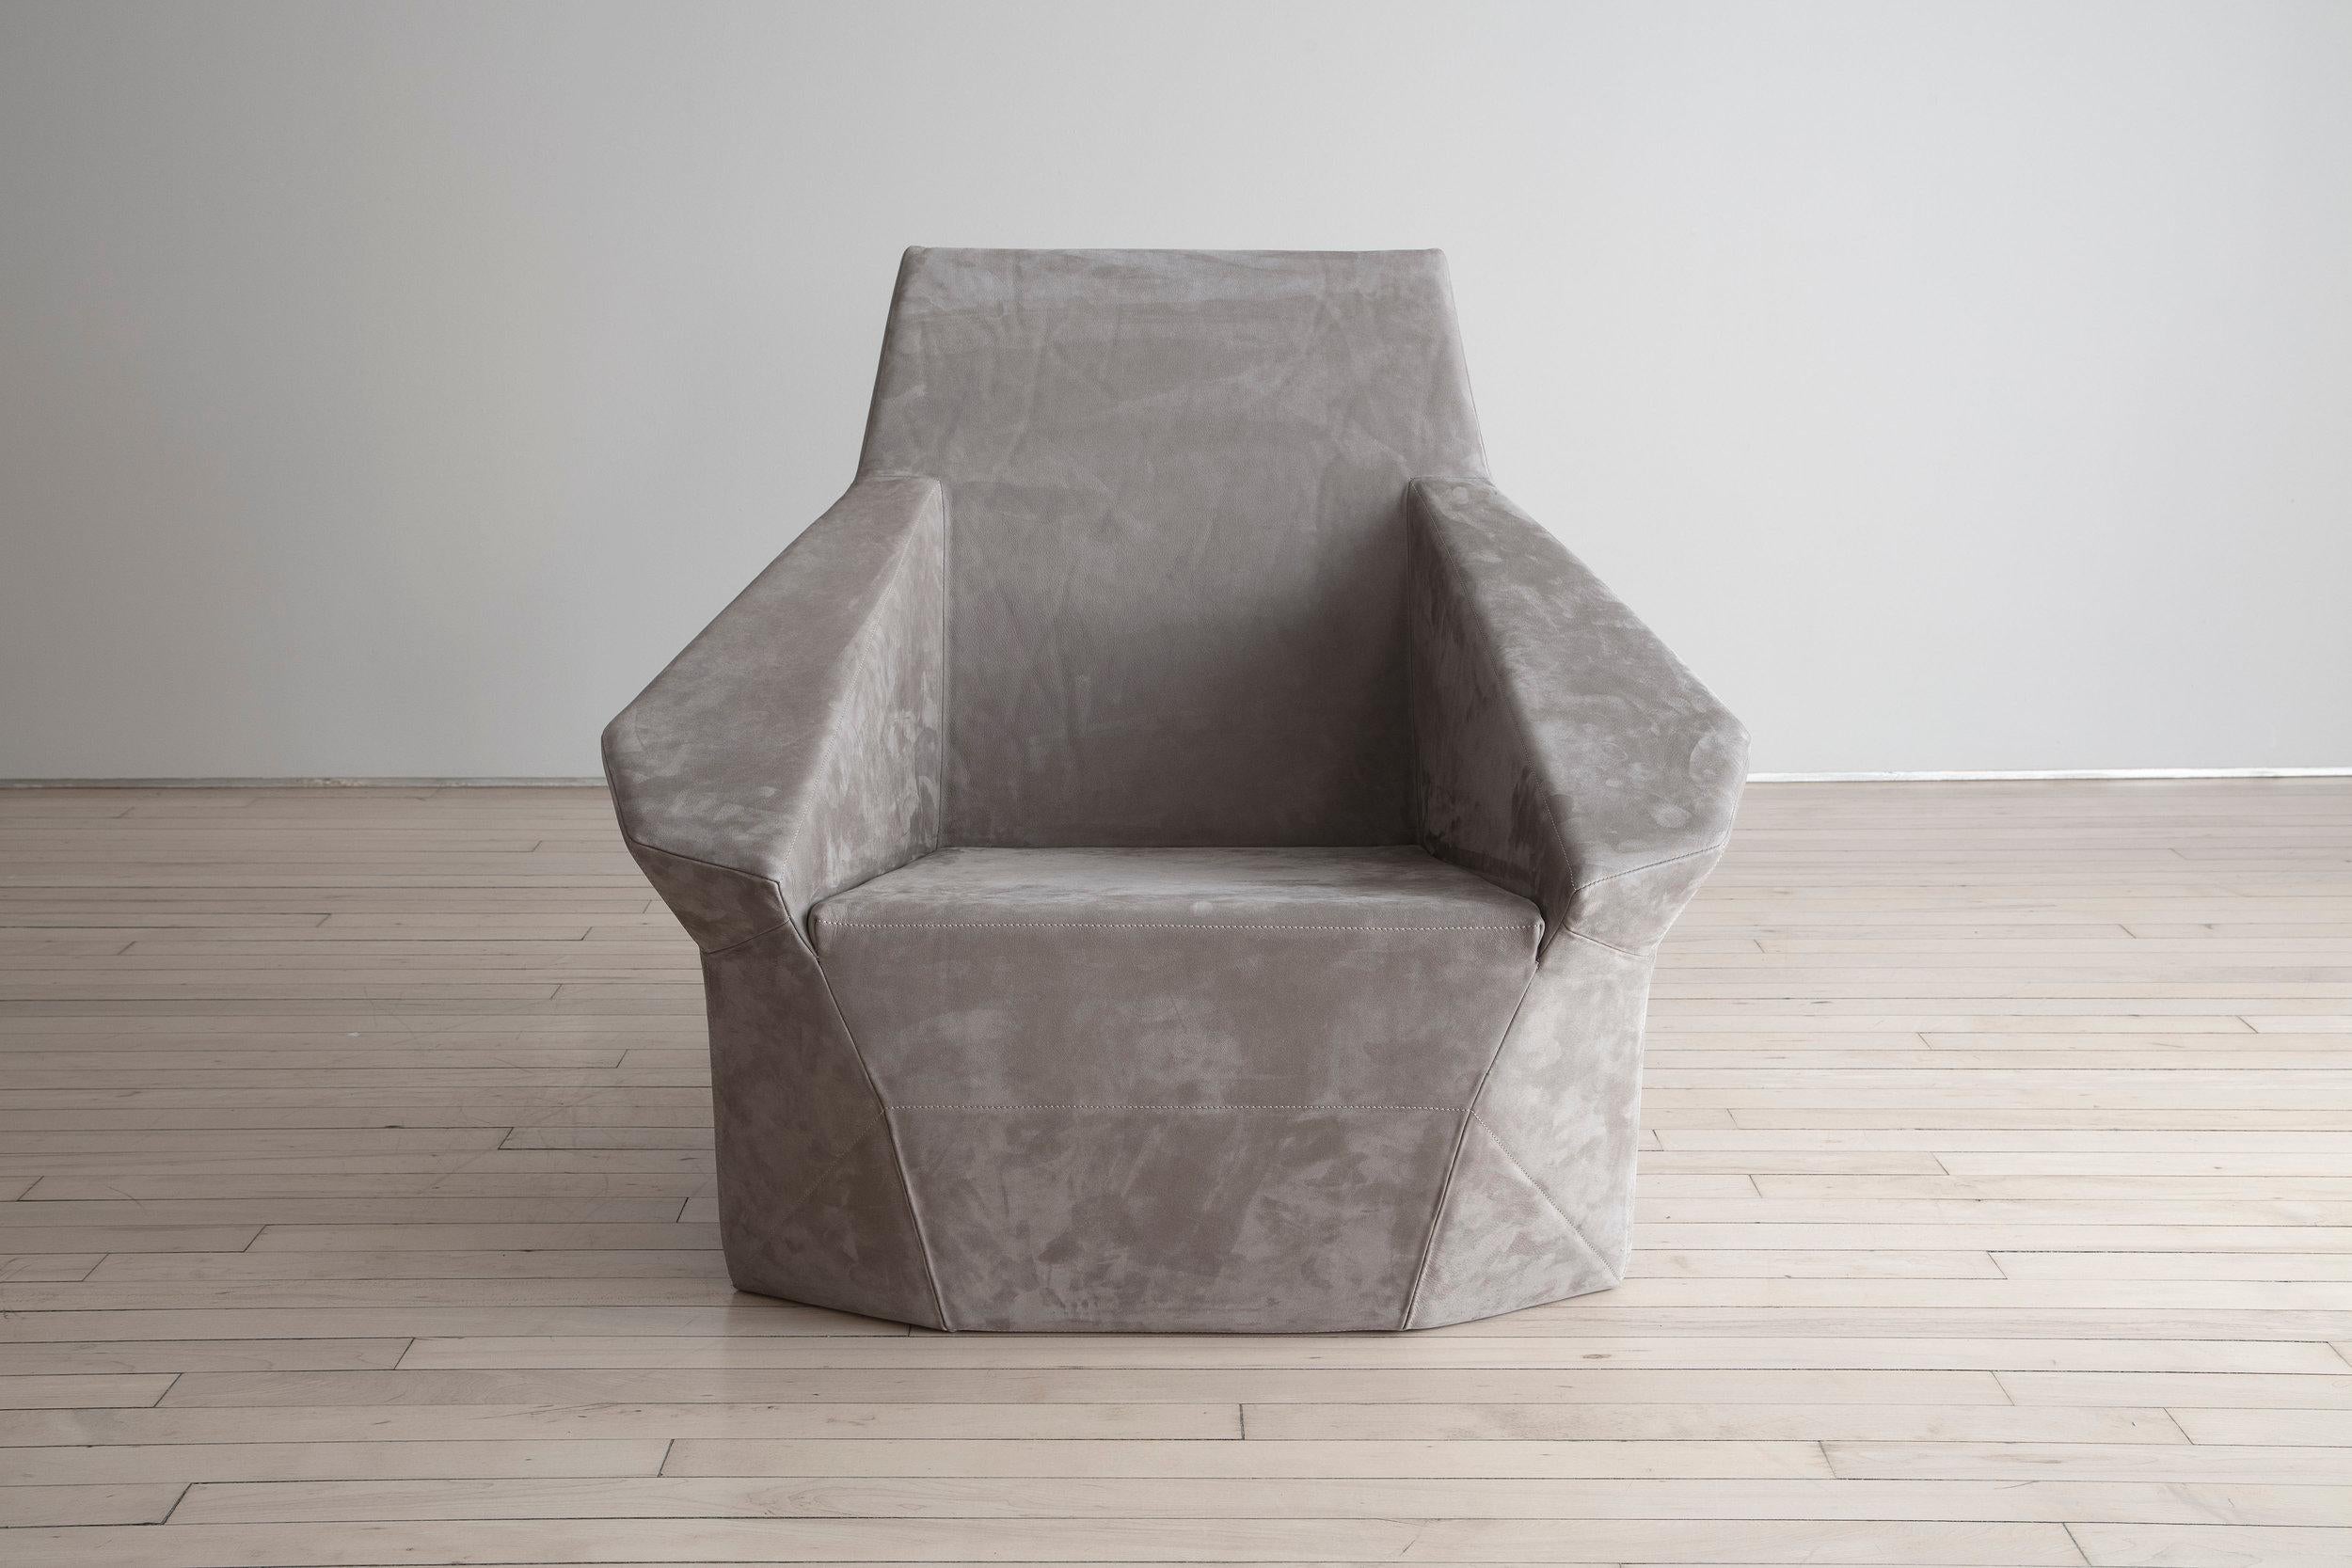 Argentinian designer, Pablo Reinoso draws a sculptural armchair and ottoman set for Domeau & Pe´re`s with the challenge to come up with the lightest piece possible while maintaining great structural efficiency and the integrity of the design.

The